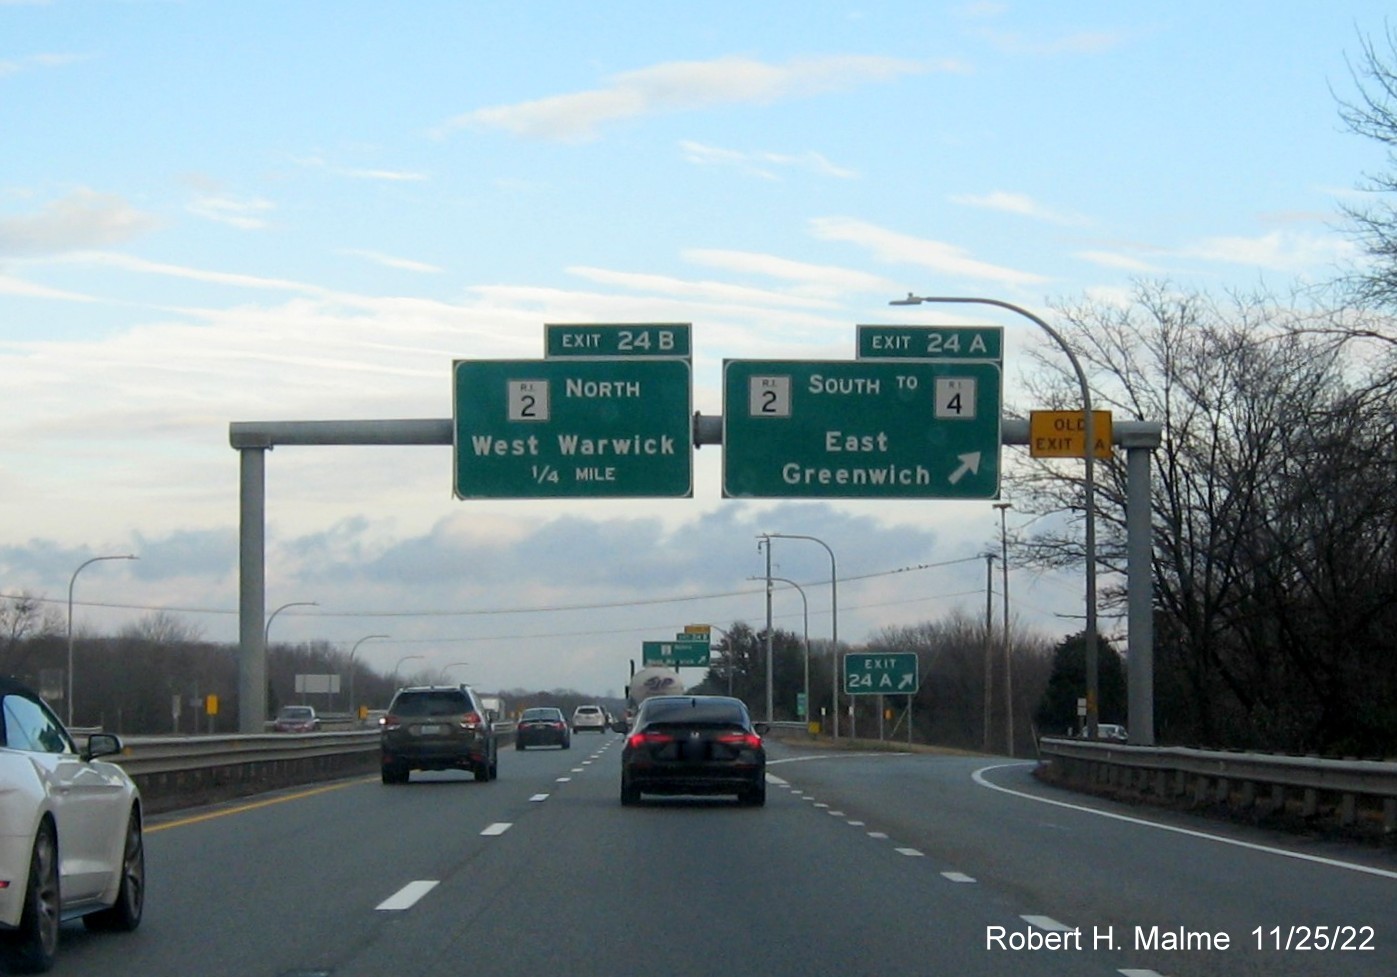 Image of overhead signage at ramp for RI 2 South to RI 4 exit with new milepost based exit number and yellow Old Exit 8 sign above exit tab on I-95 North in West Warwick, November 2022